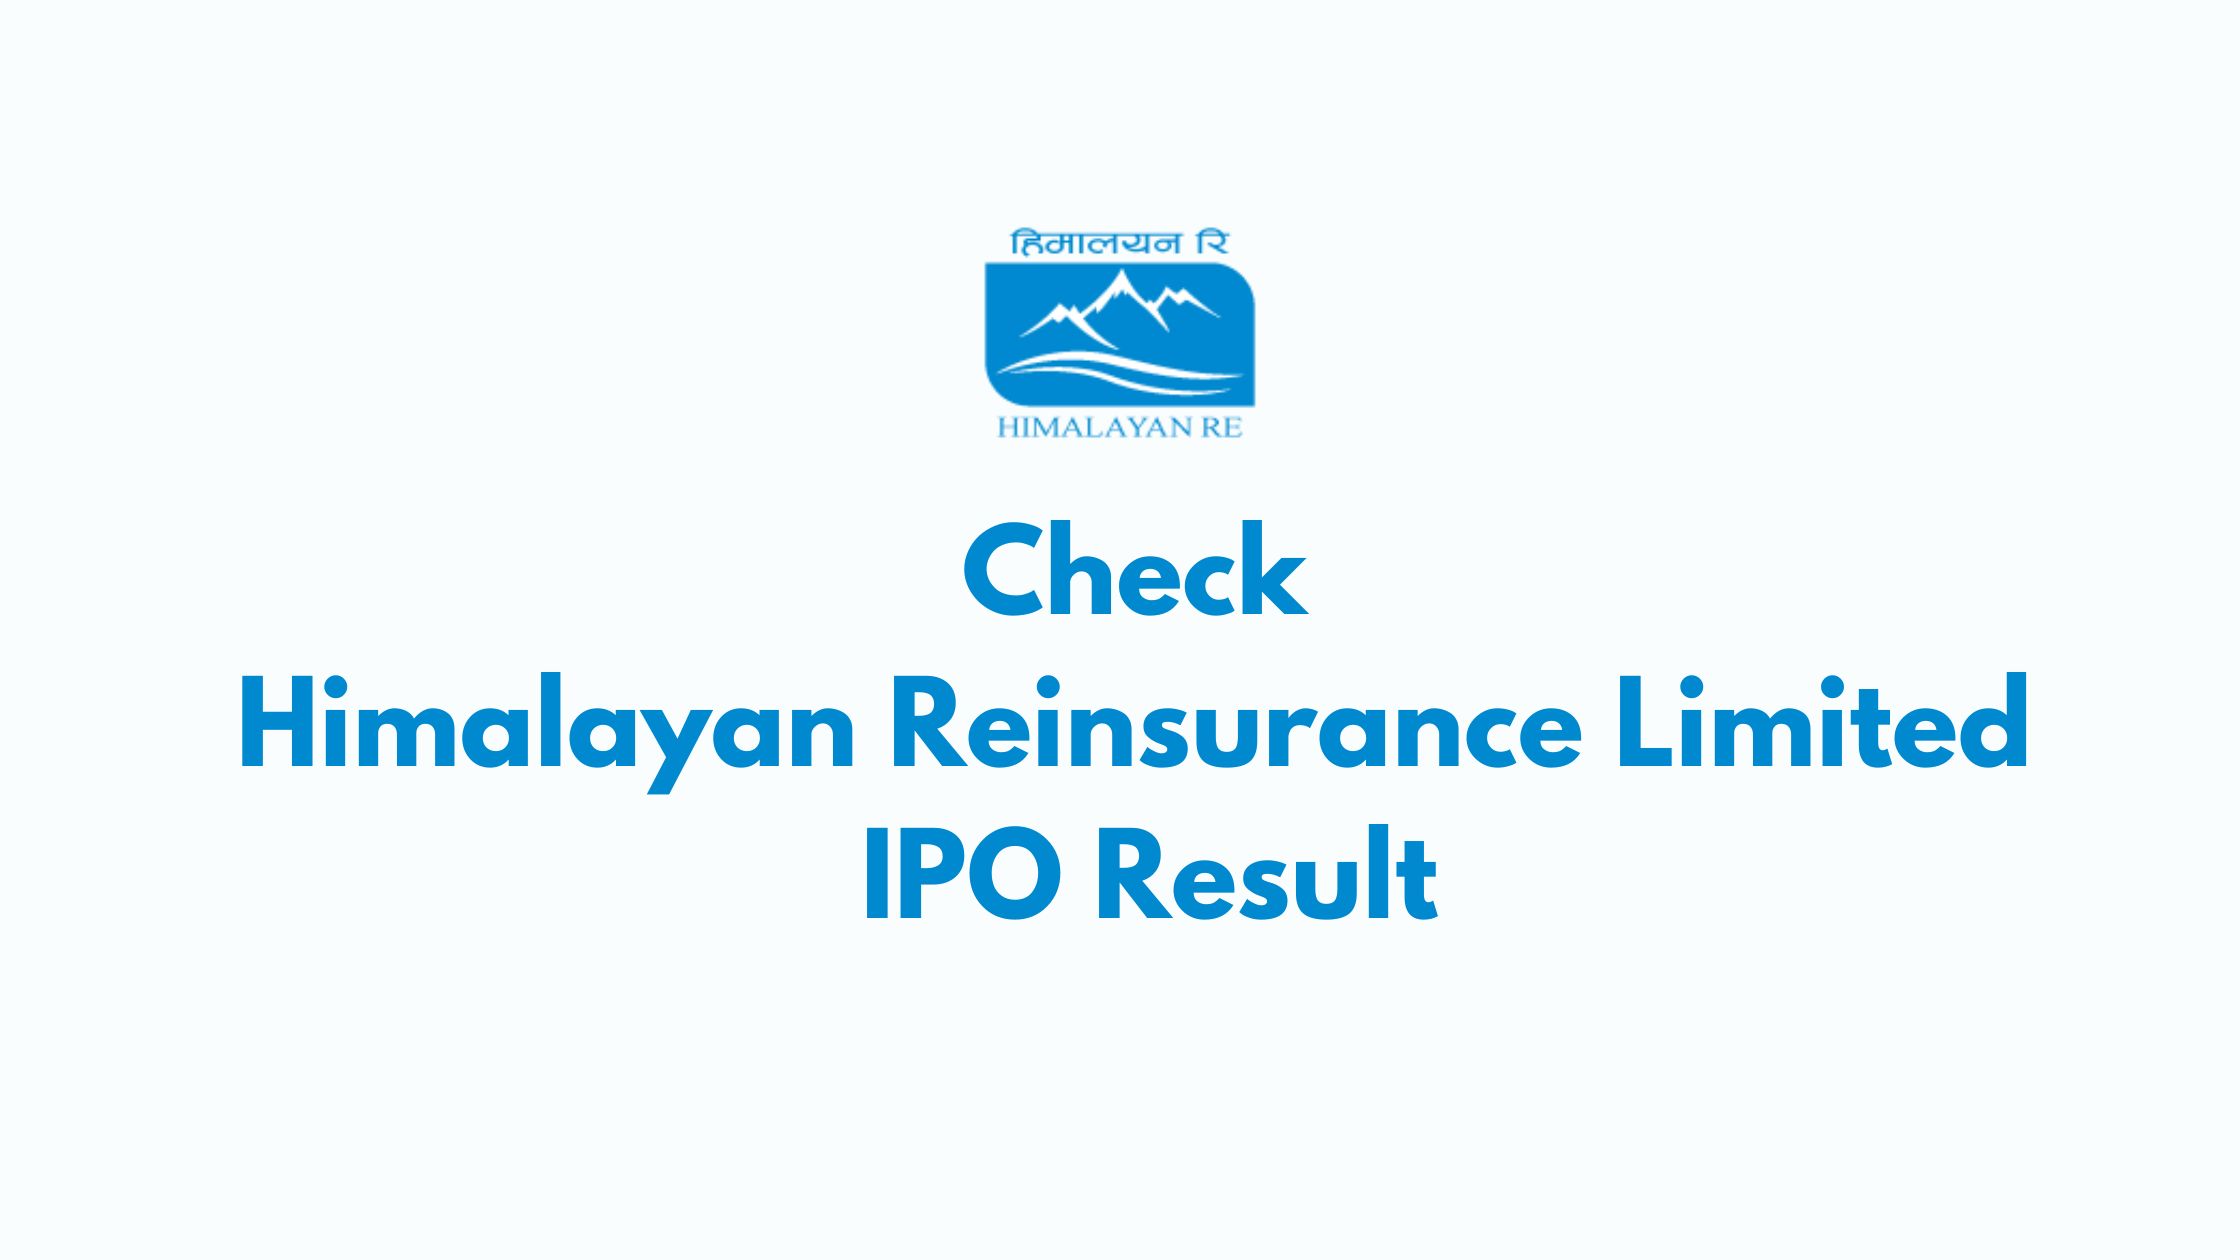 Check Himalayan Reinsurance Limited IPO Result